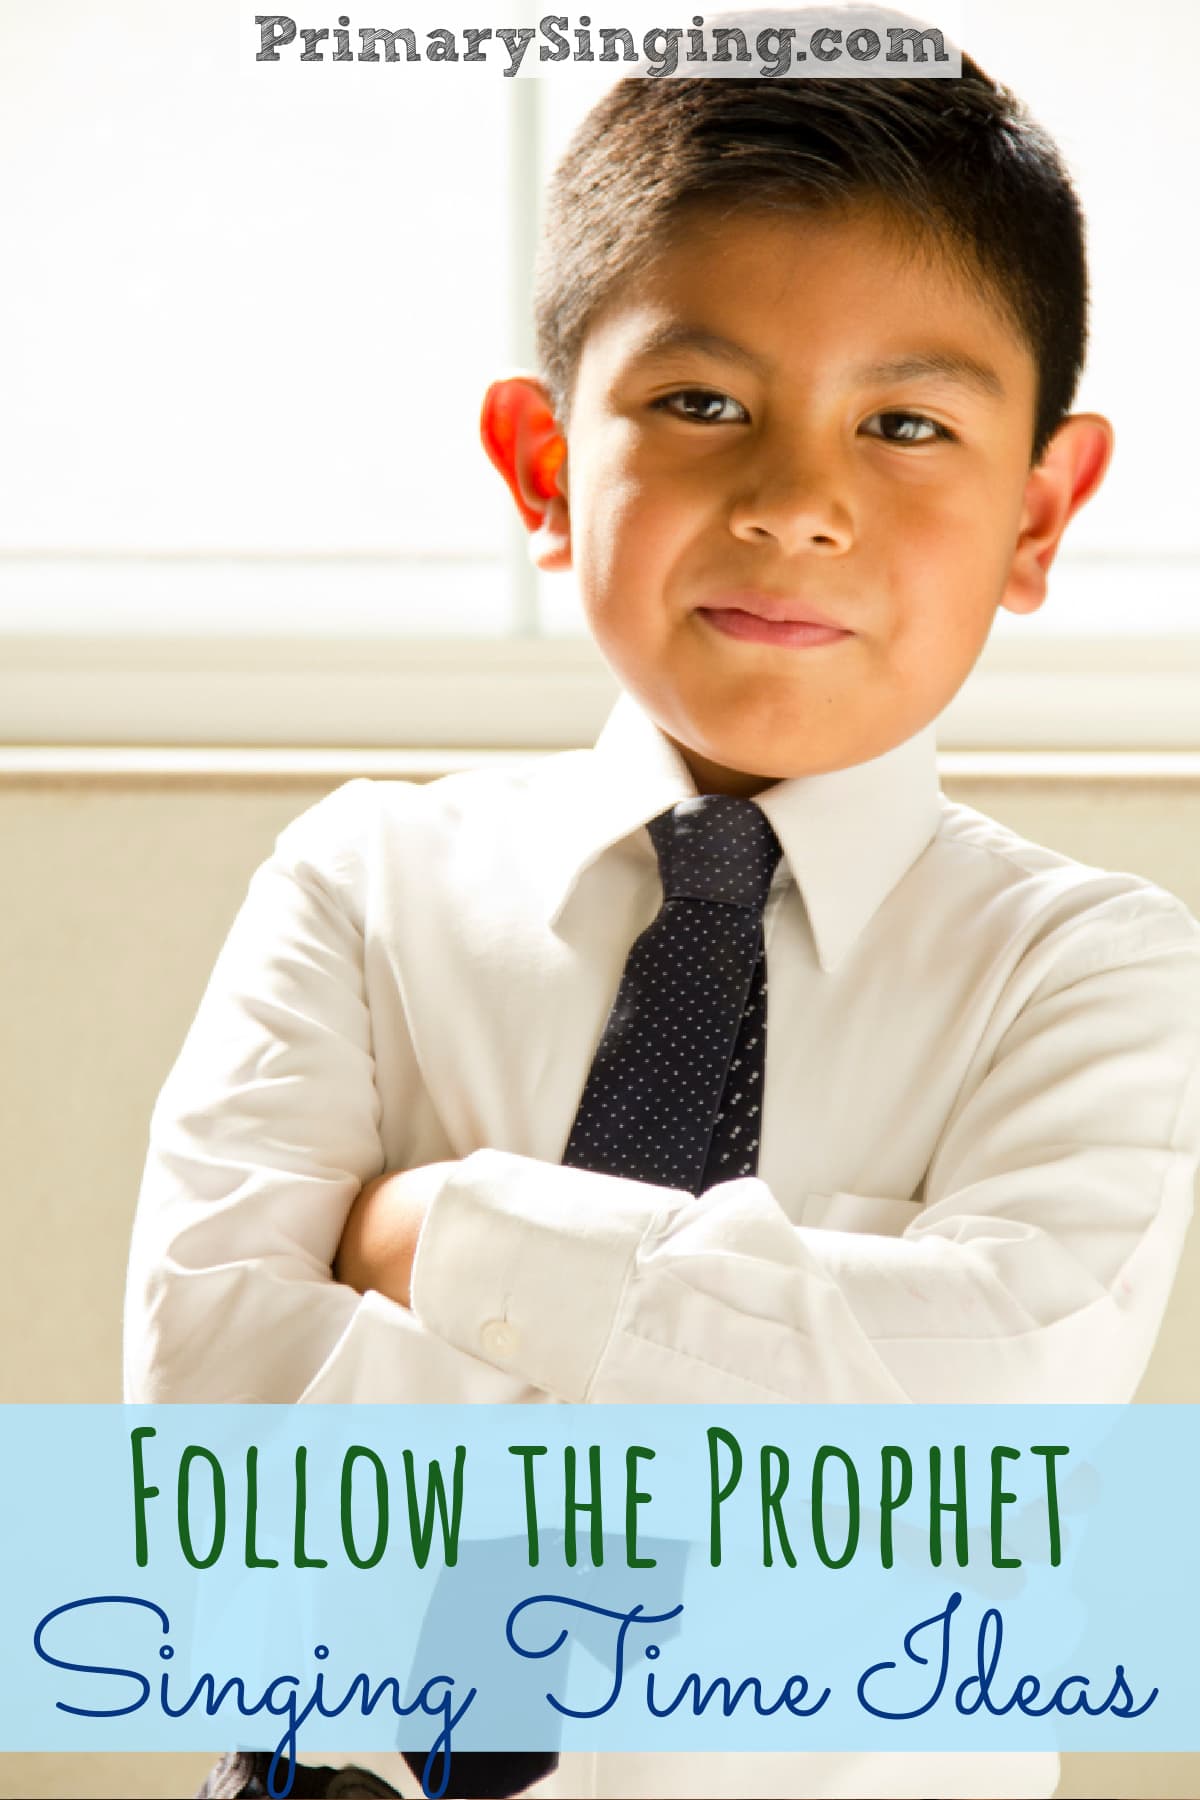 2024 LDS Primary Songs List for Come, Follow Me: Book of Mormon Easy singing time ideas for Primary Music Leaders Follow the Prophet Singing Time Ideas